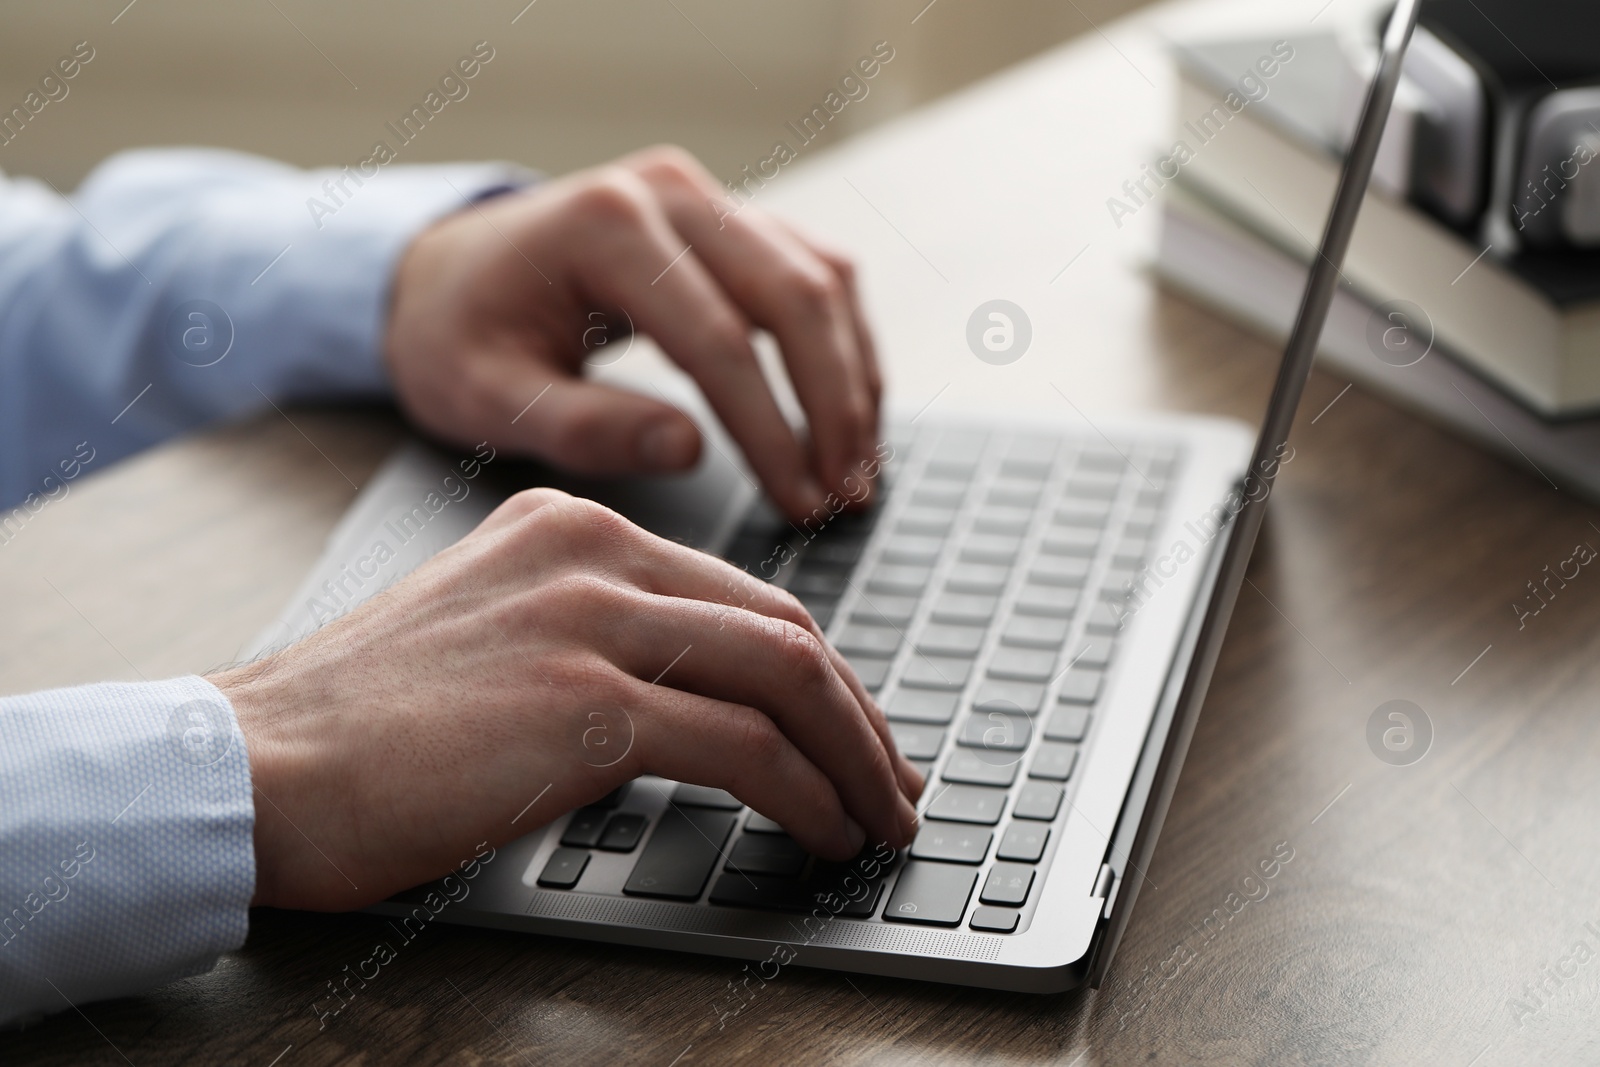 Photo of E-learning. Man using laptop during online lesson at table indoors, closeup